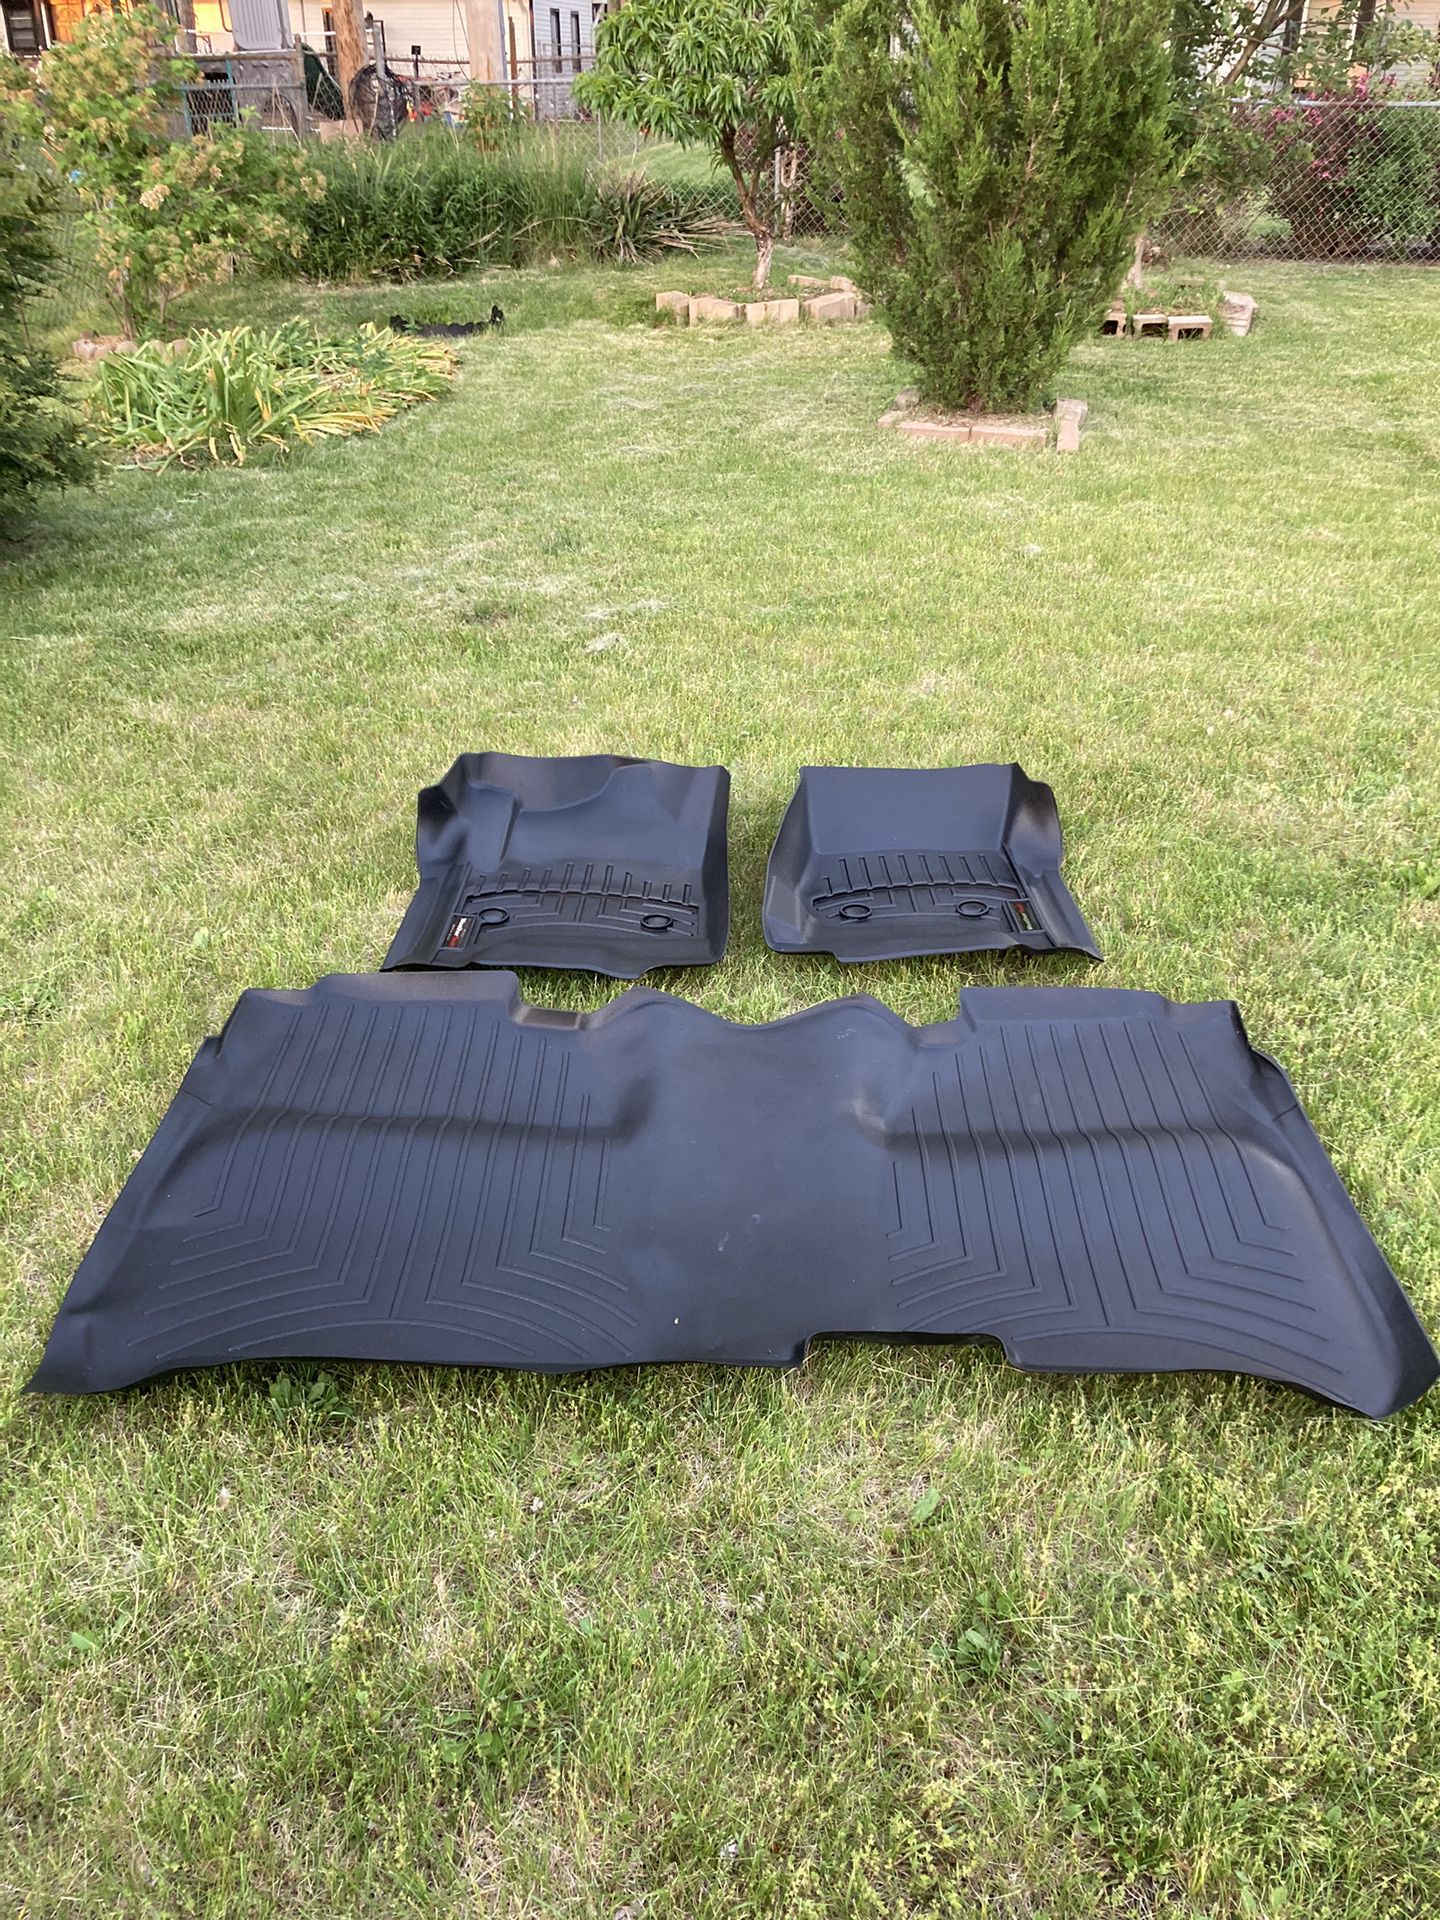 Weather Tech Floor Mats In Excellent Condition, They’ll Fit: 2014/2019 Chevy Silverado/GMC Sierra 1500,2500,3500 Crew Cab Trucks.